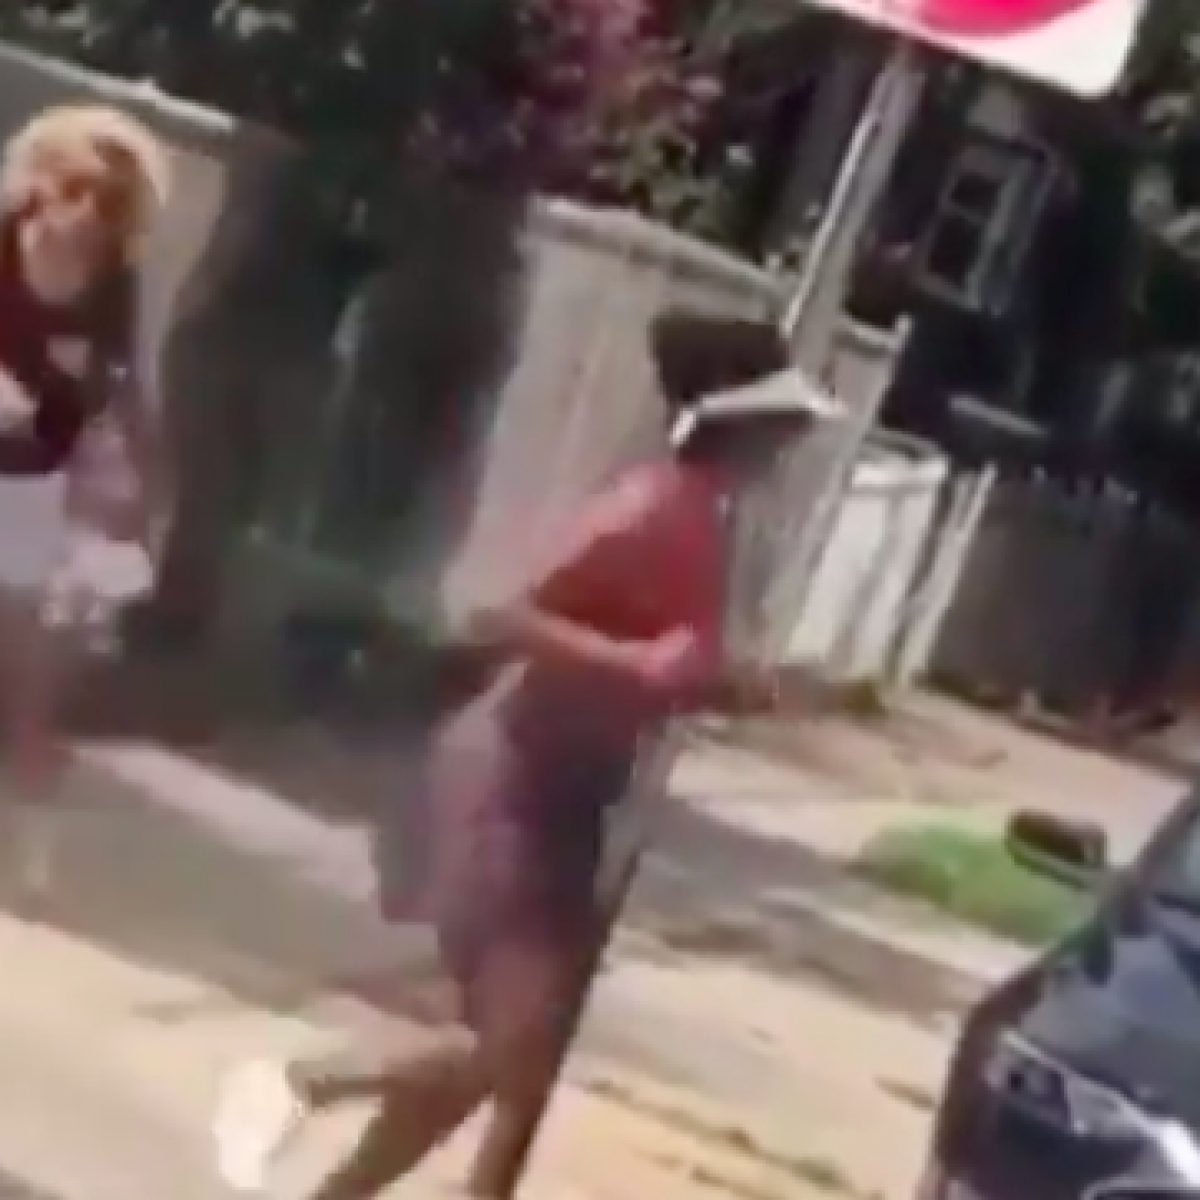 Woman Arrested For Throwing Bottle, Yelling Racial Slur At Black NYC Jogger